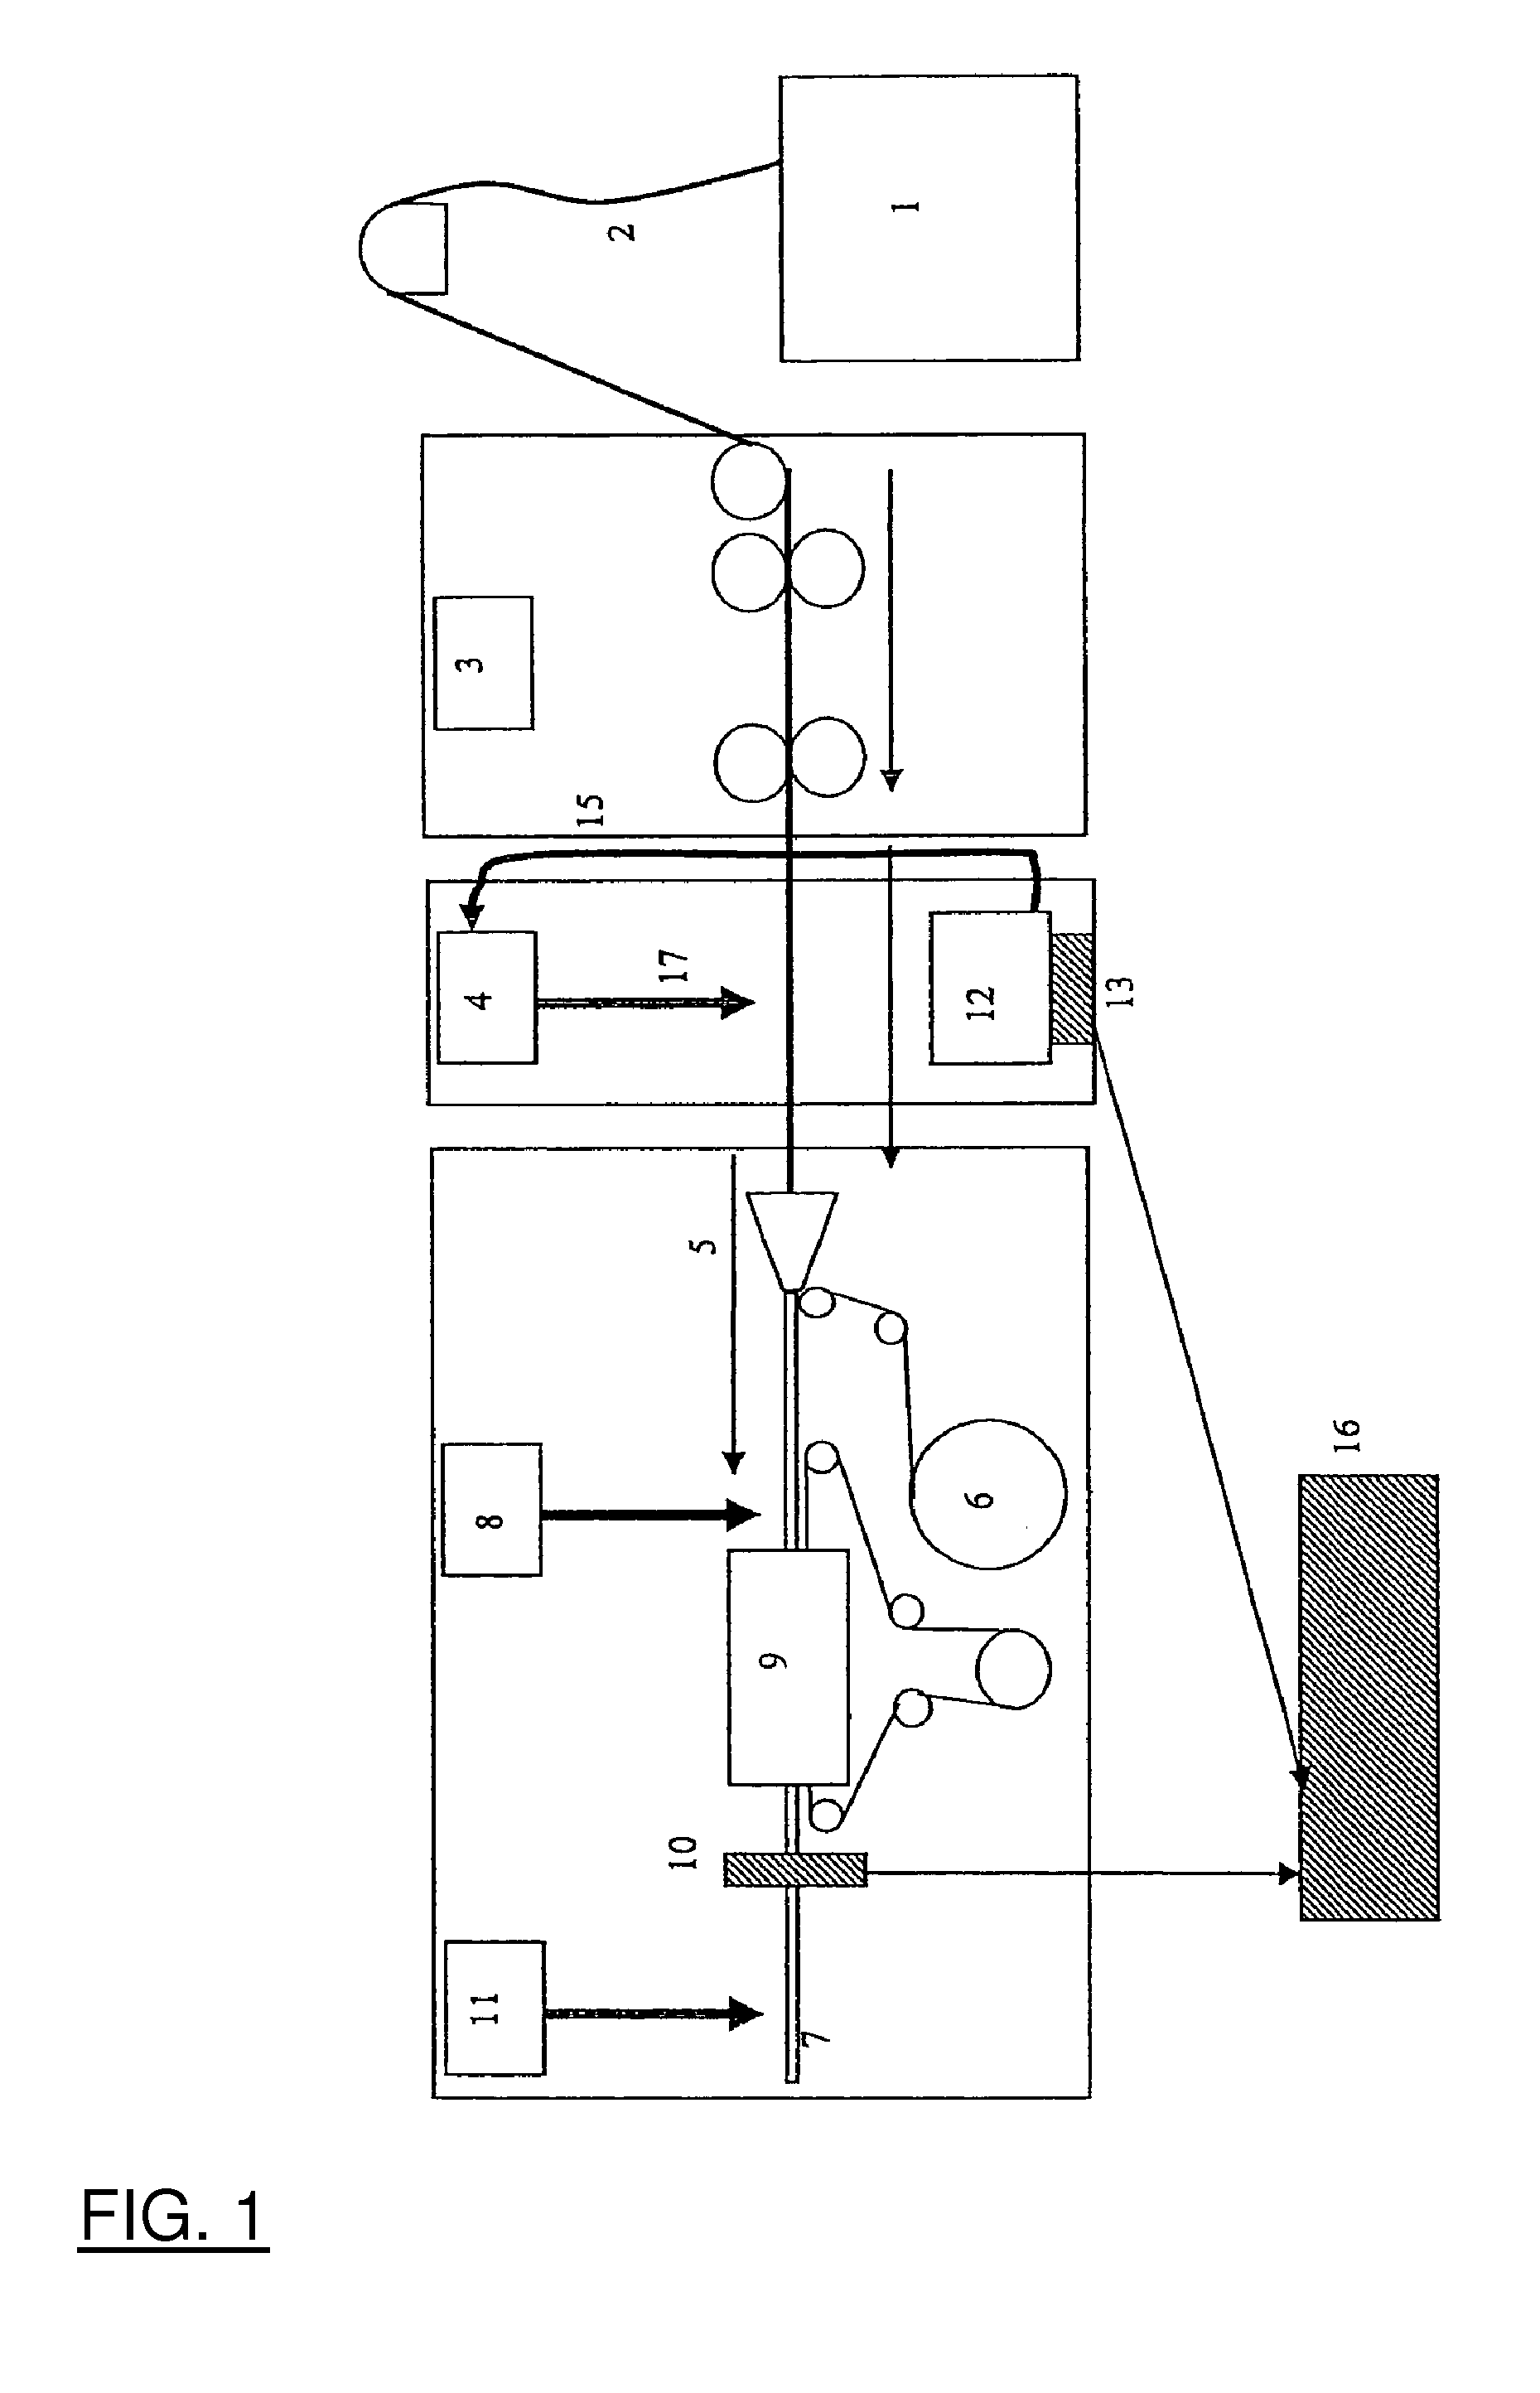 Method for online measurement of a plasticizer in an endless filter rod and a device for producing an endless filter rod of the tobacco processing industry